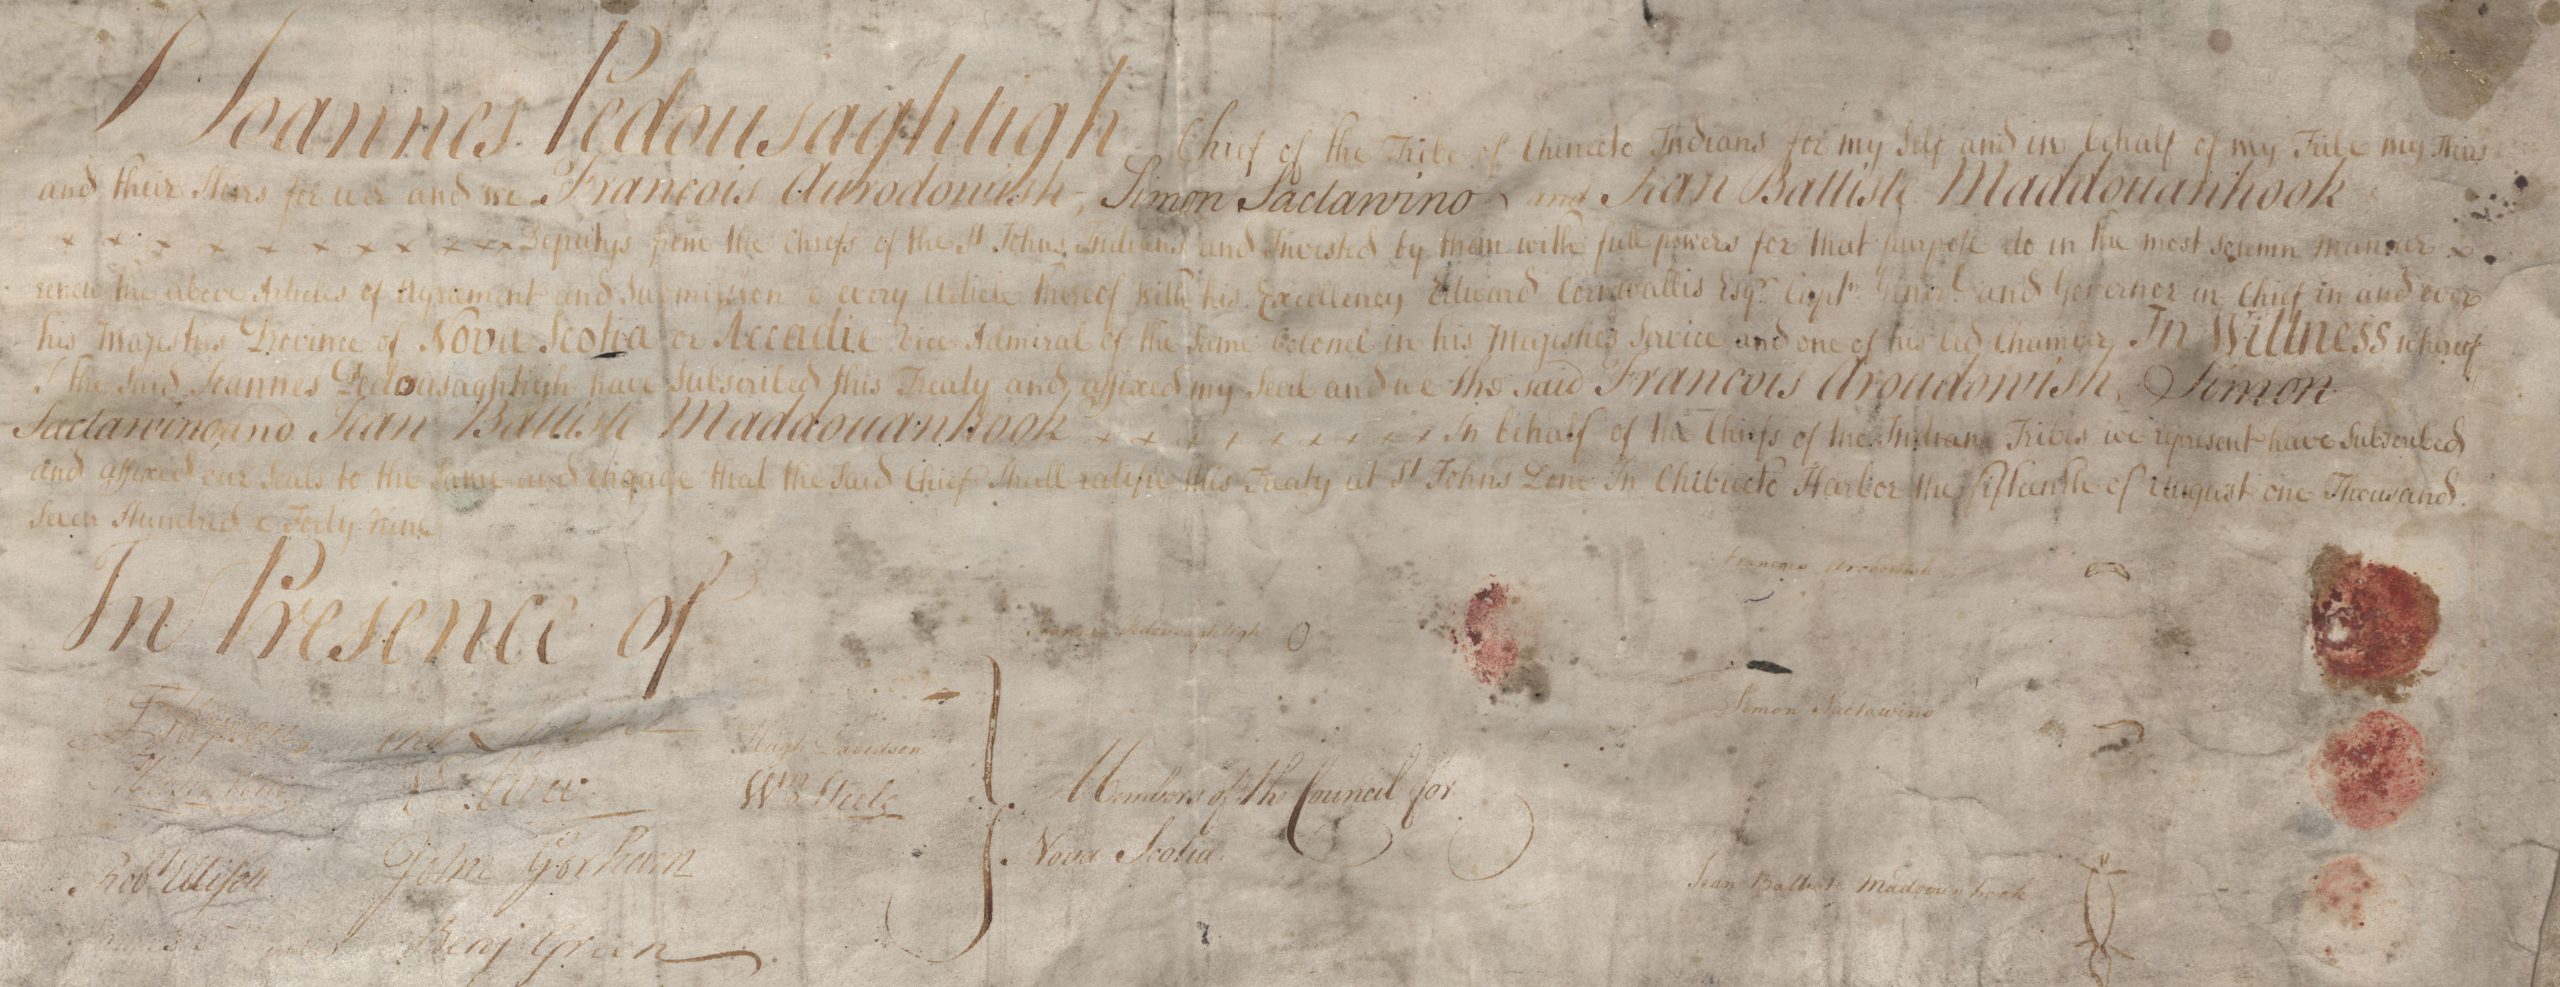 image of the original text of the 1752 treaty between the British government and Mi'kmaw peoples